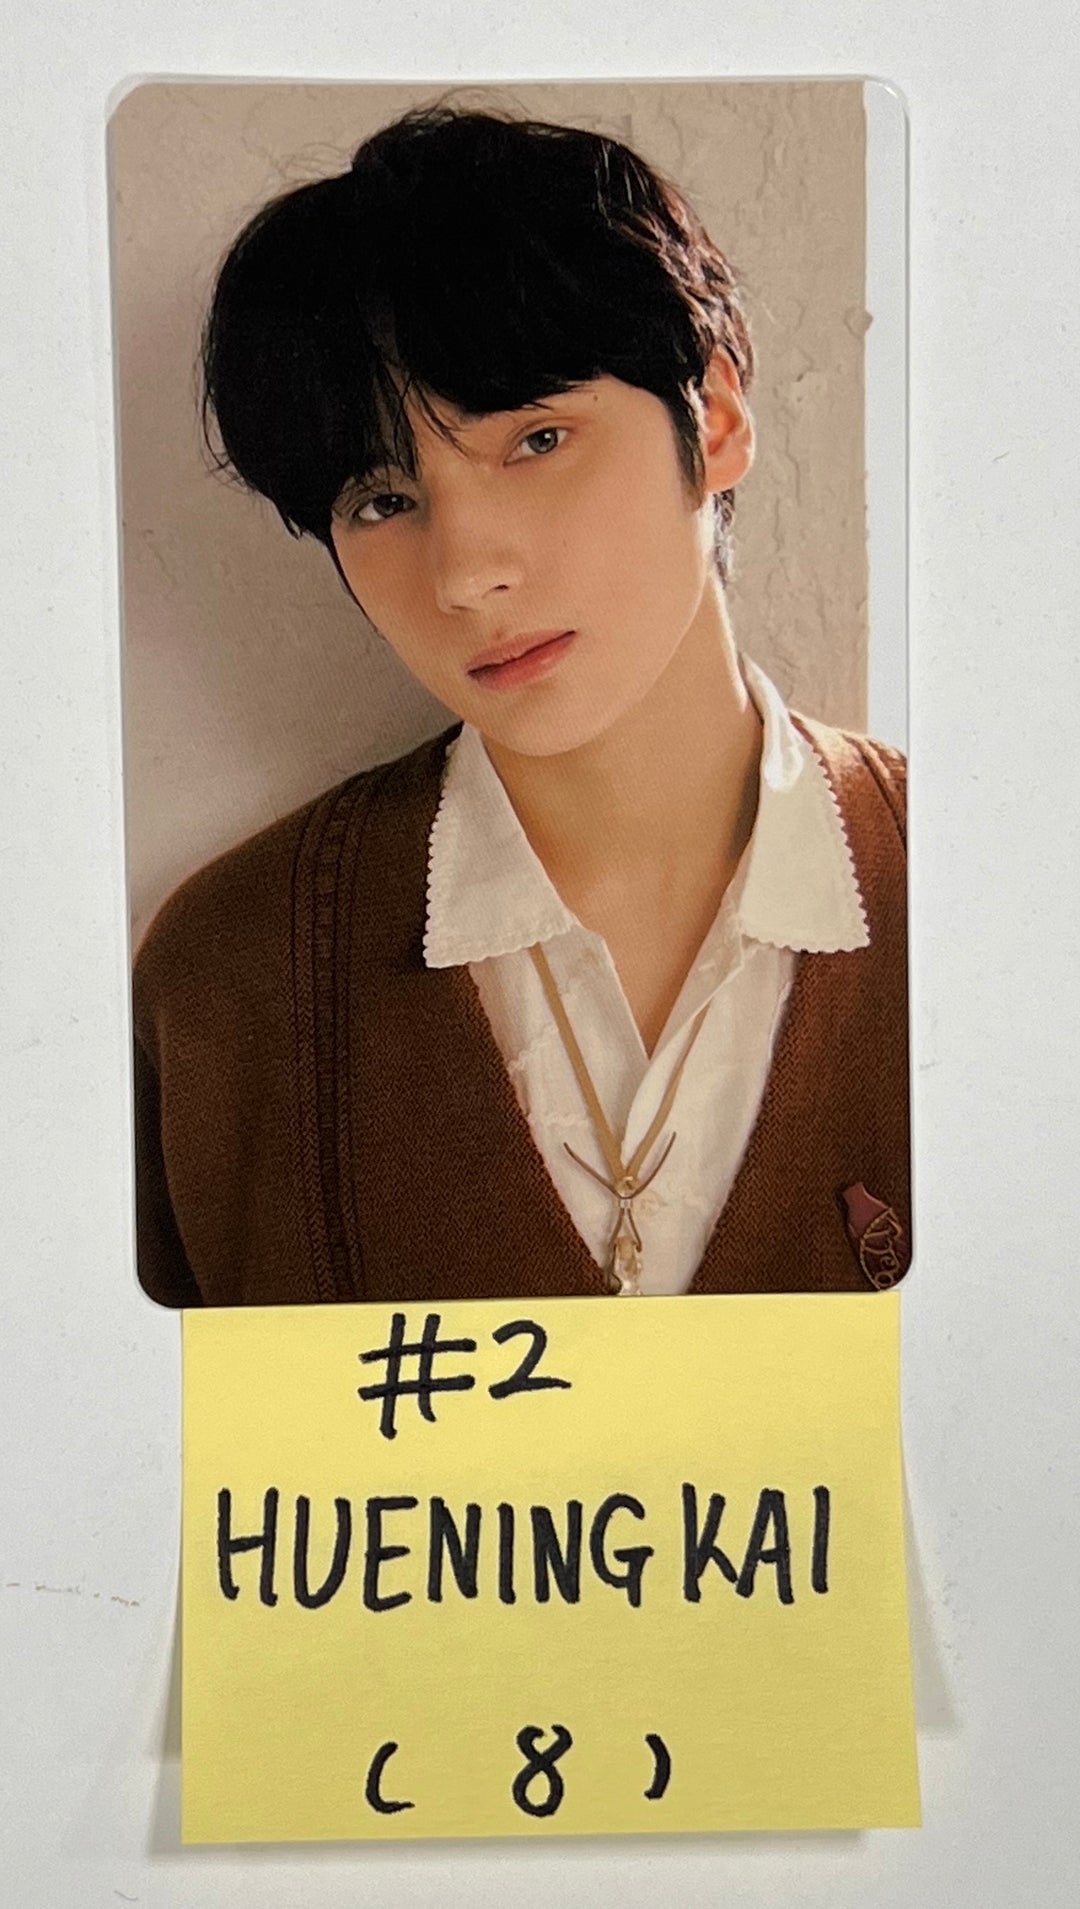 TXT "SWEET" - Official Trading Photocard [23.10.17]